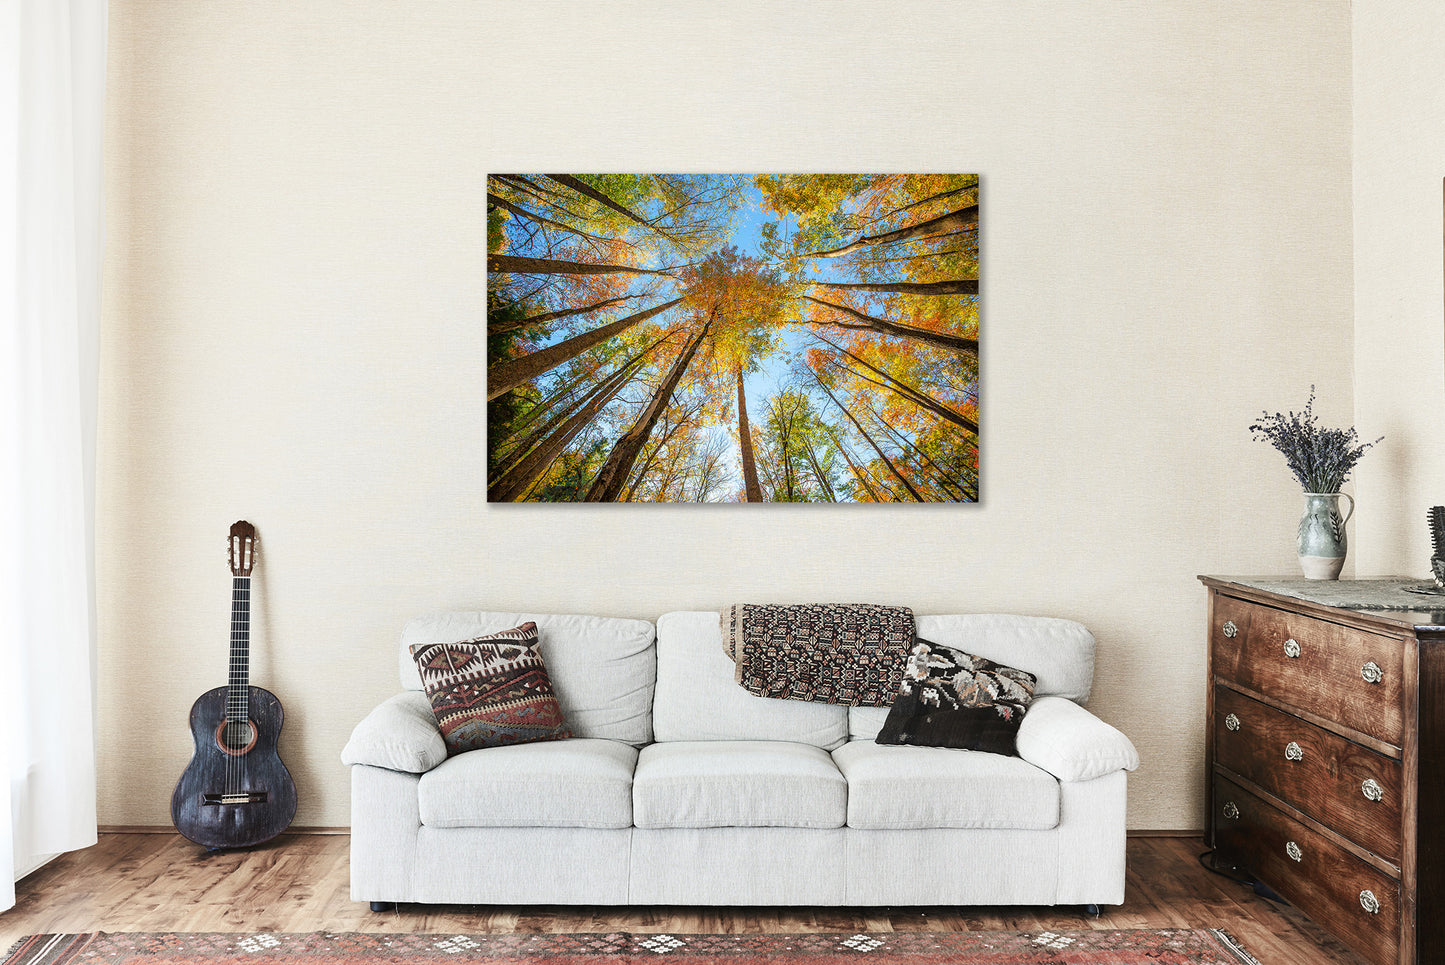 Forest Canvas Wall Art - Gallery Wrap of Looking Up in Trees on Autumn Day in Great Smoky Mountains Tennessee - Photography Artwork Decor